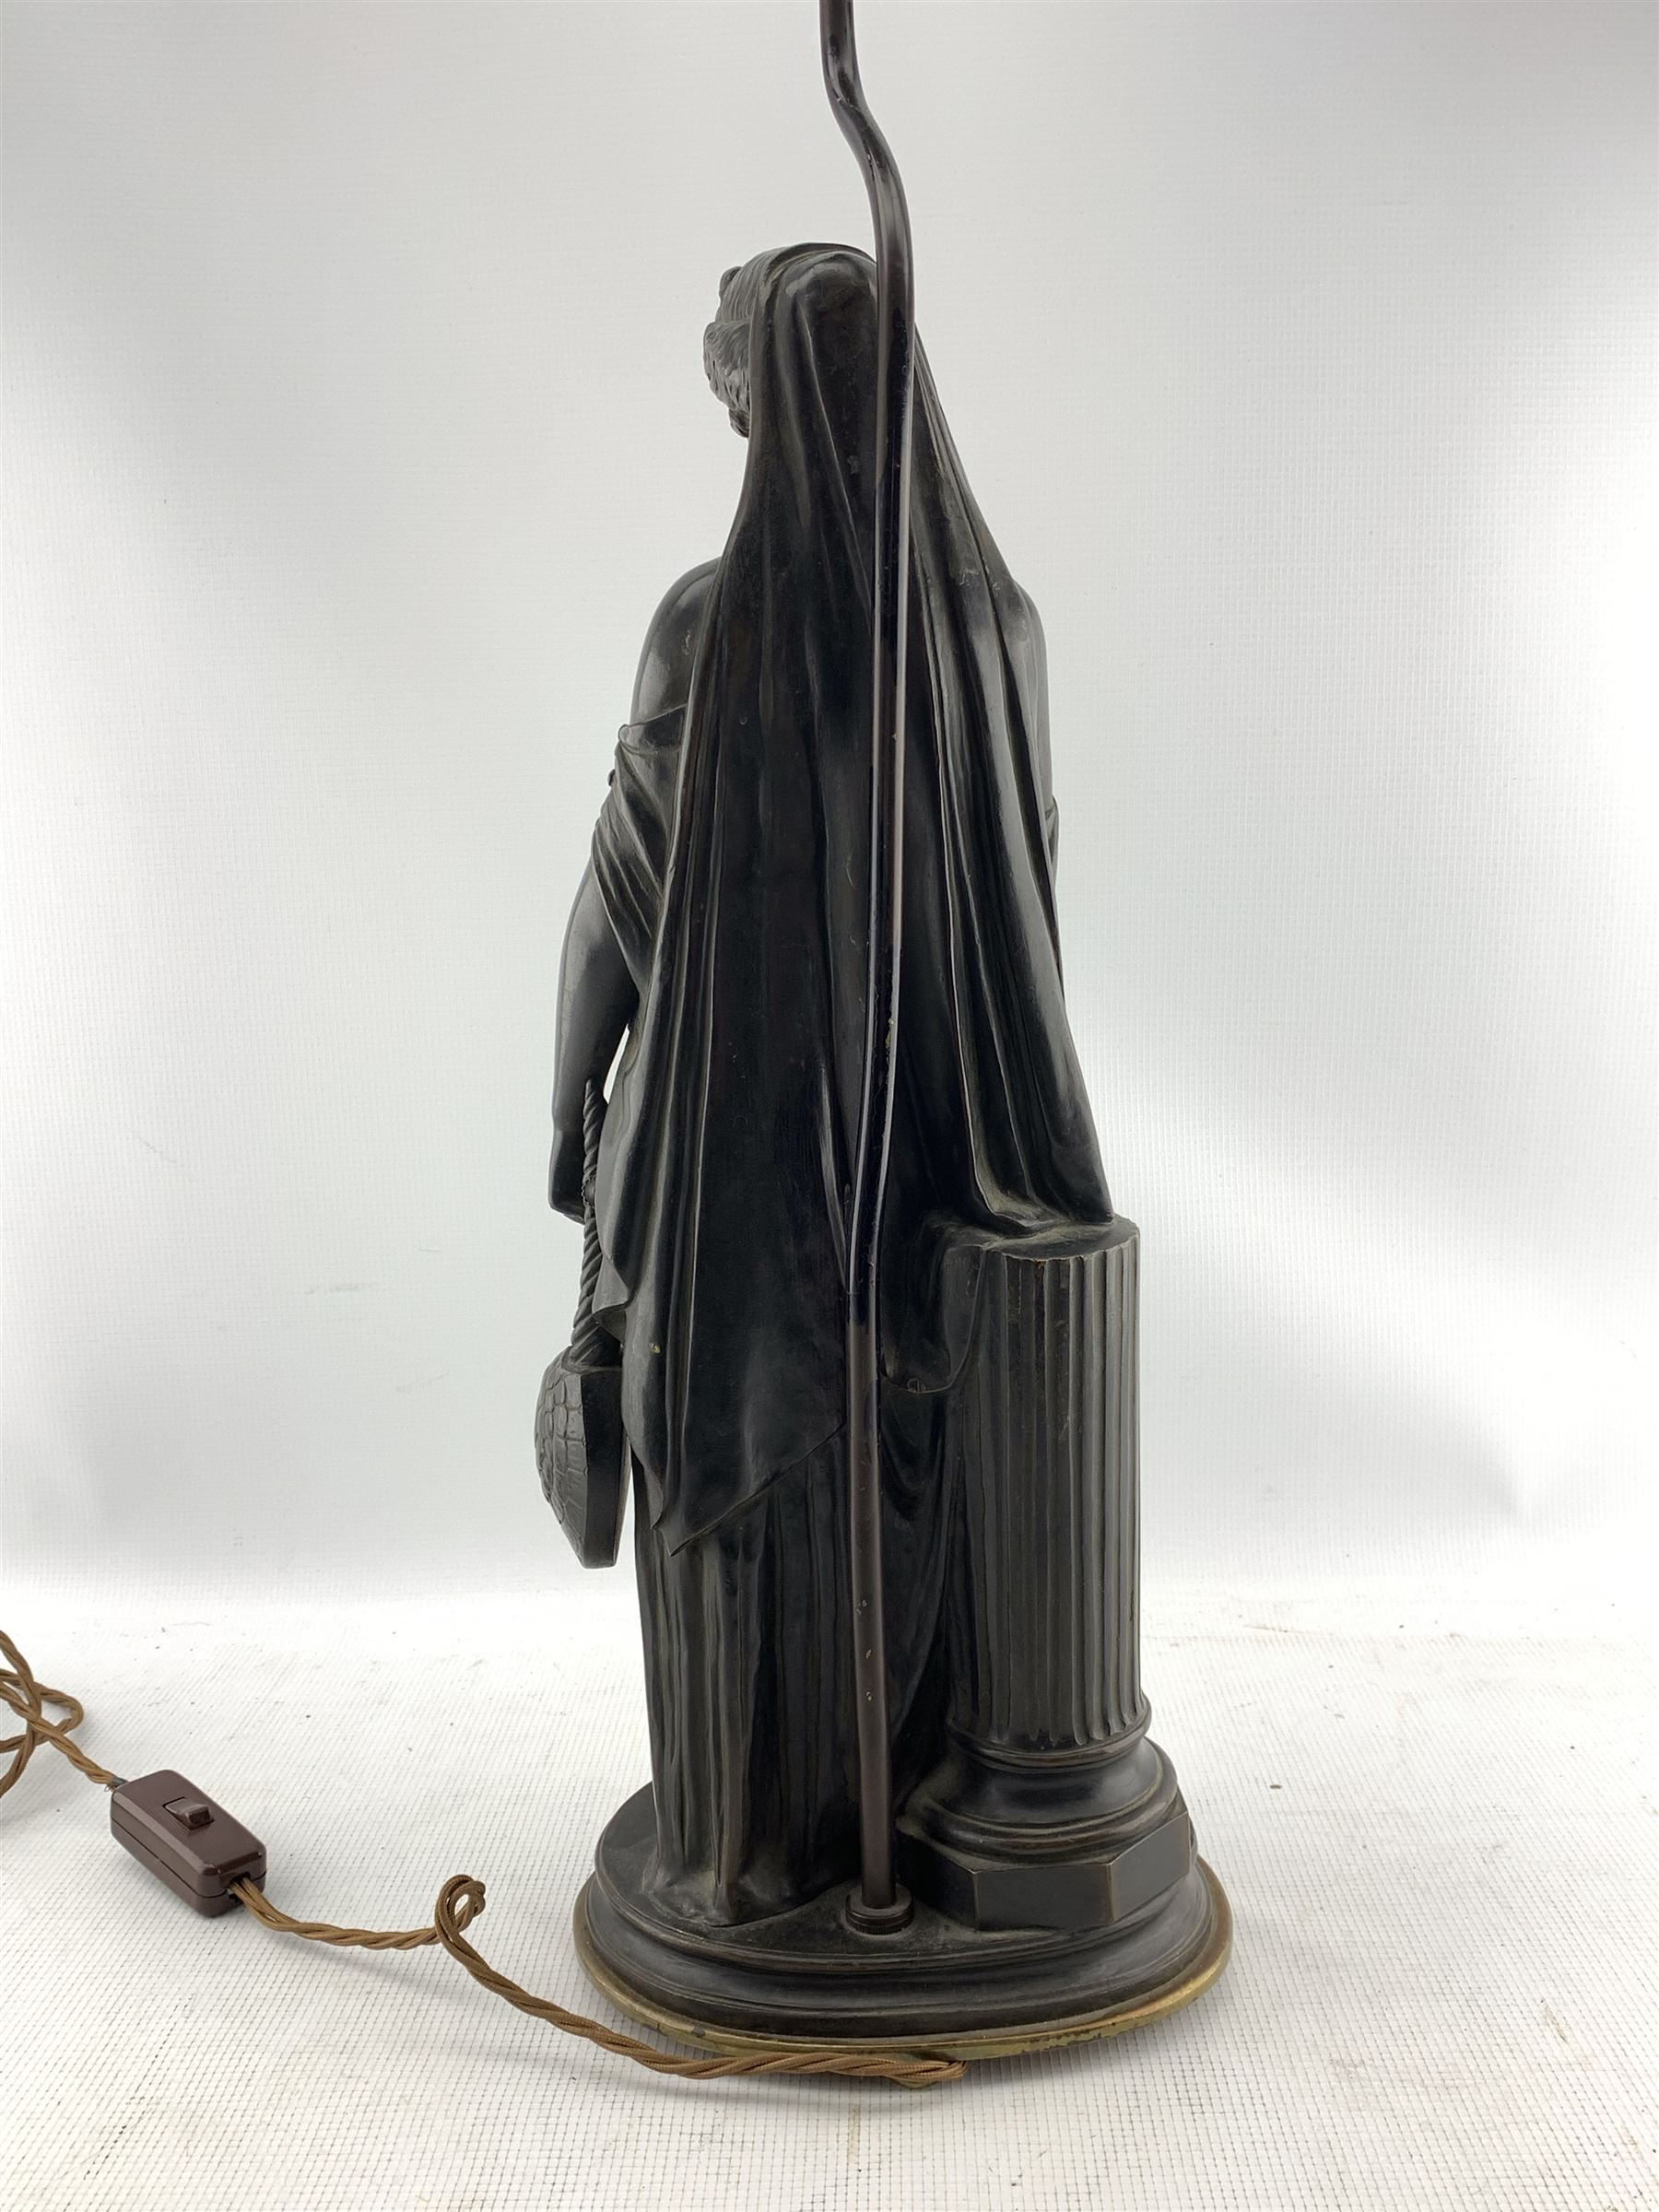 19th century patinated bronze figural table lamp modelled as Erato - Image 2 of 8